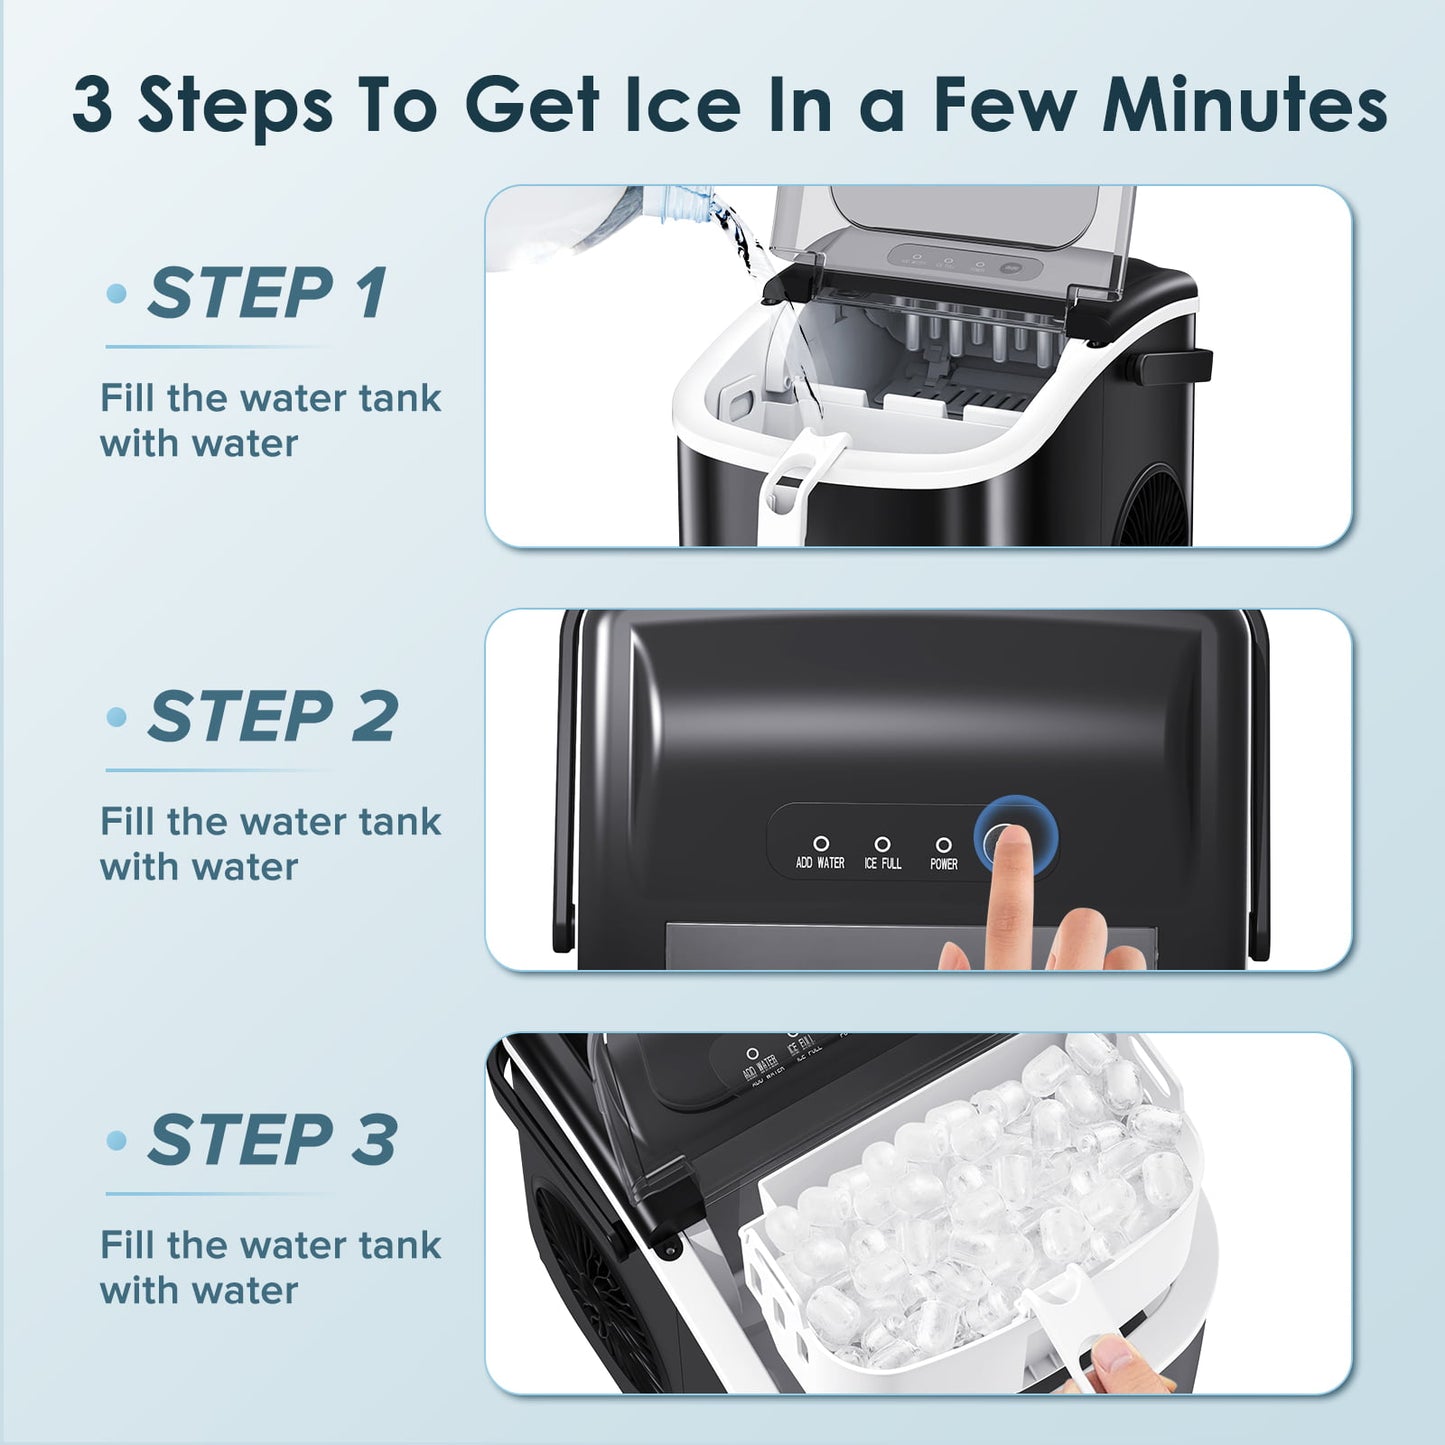 LHRIVER Countertop Ice Maker, Portable Ice Machine with Handle, 26Lbs/24H, 9Pcs/6Mins, One-Click Operation Ice Makers, with Ice Scoop and Basket, for Kitchen/Bar/Party - (Black)